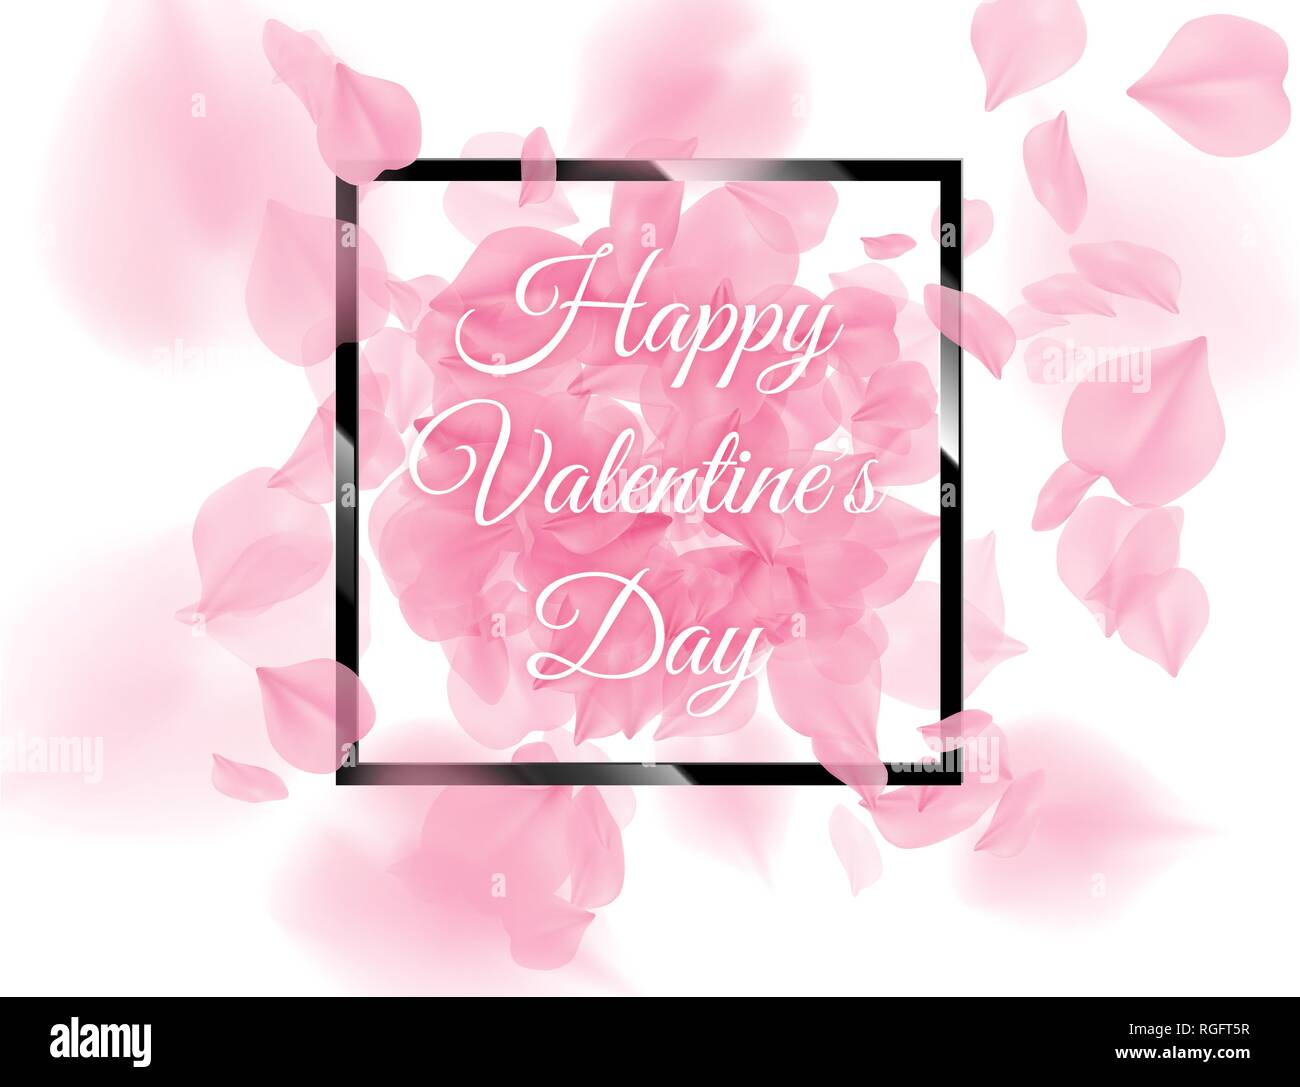 Happy Valentines Day black square frame with pink sacura petals falling on white background. Vector rose flower 3D romantic illustration. Spring Stock Vector